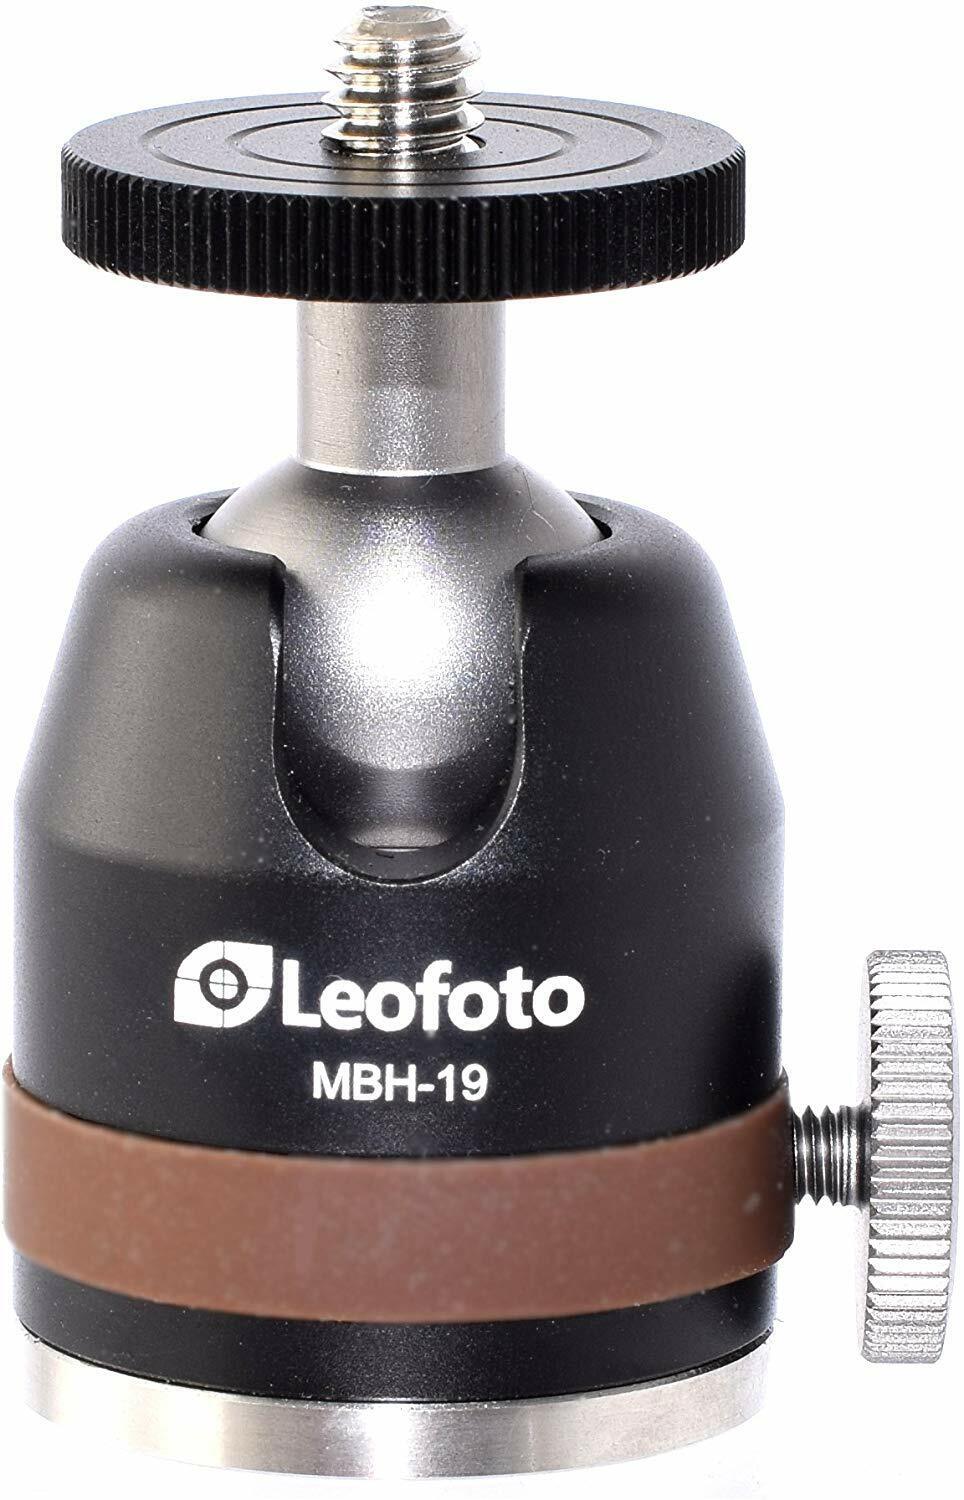 Leofoto Micro Head Mbh-19 19mm Ball All Metal With Independent Pan Lock